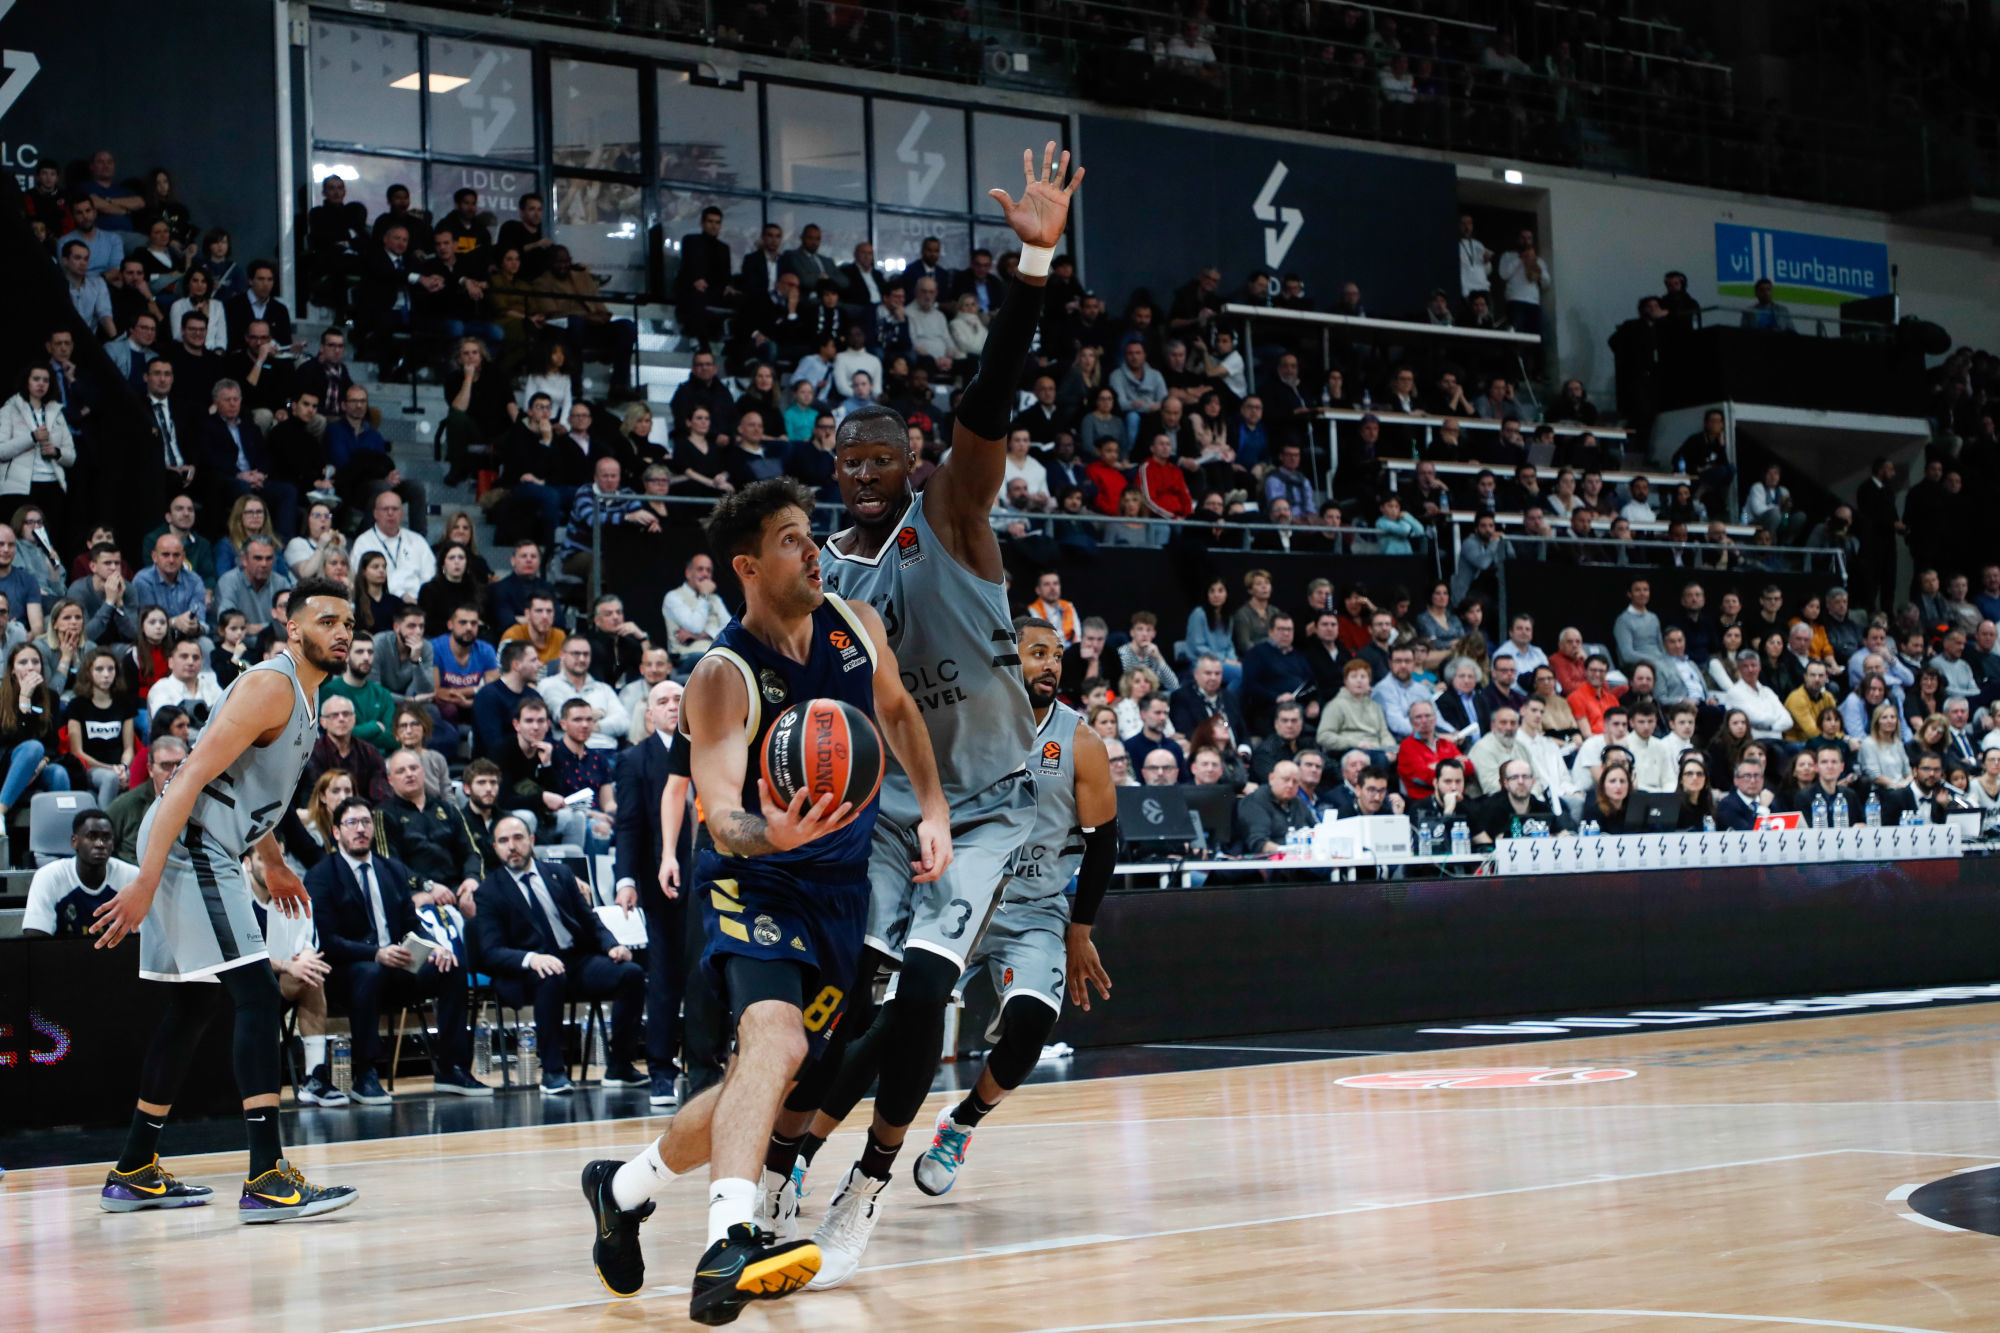 Nico LAPROVITTOLA of Real Madrid and Tonye JEKIRI of Lyon during the Euroleague match between ASVEL and Real Madrid on January 3, 2020 in Villeurbanne, France. (Photo by Romain Biard/Icon Sport) - Astroballe - Villeurbanne (France)